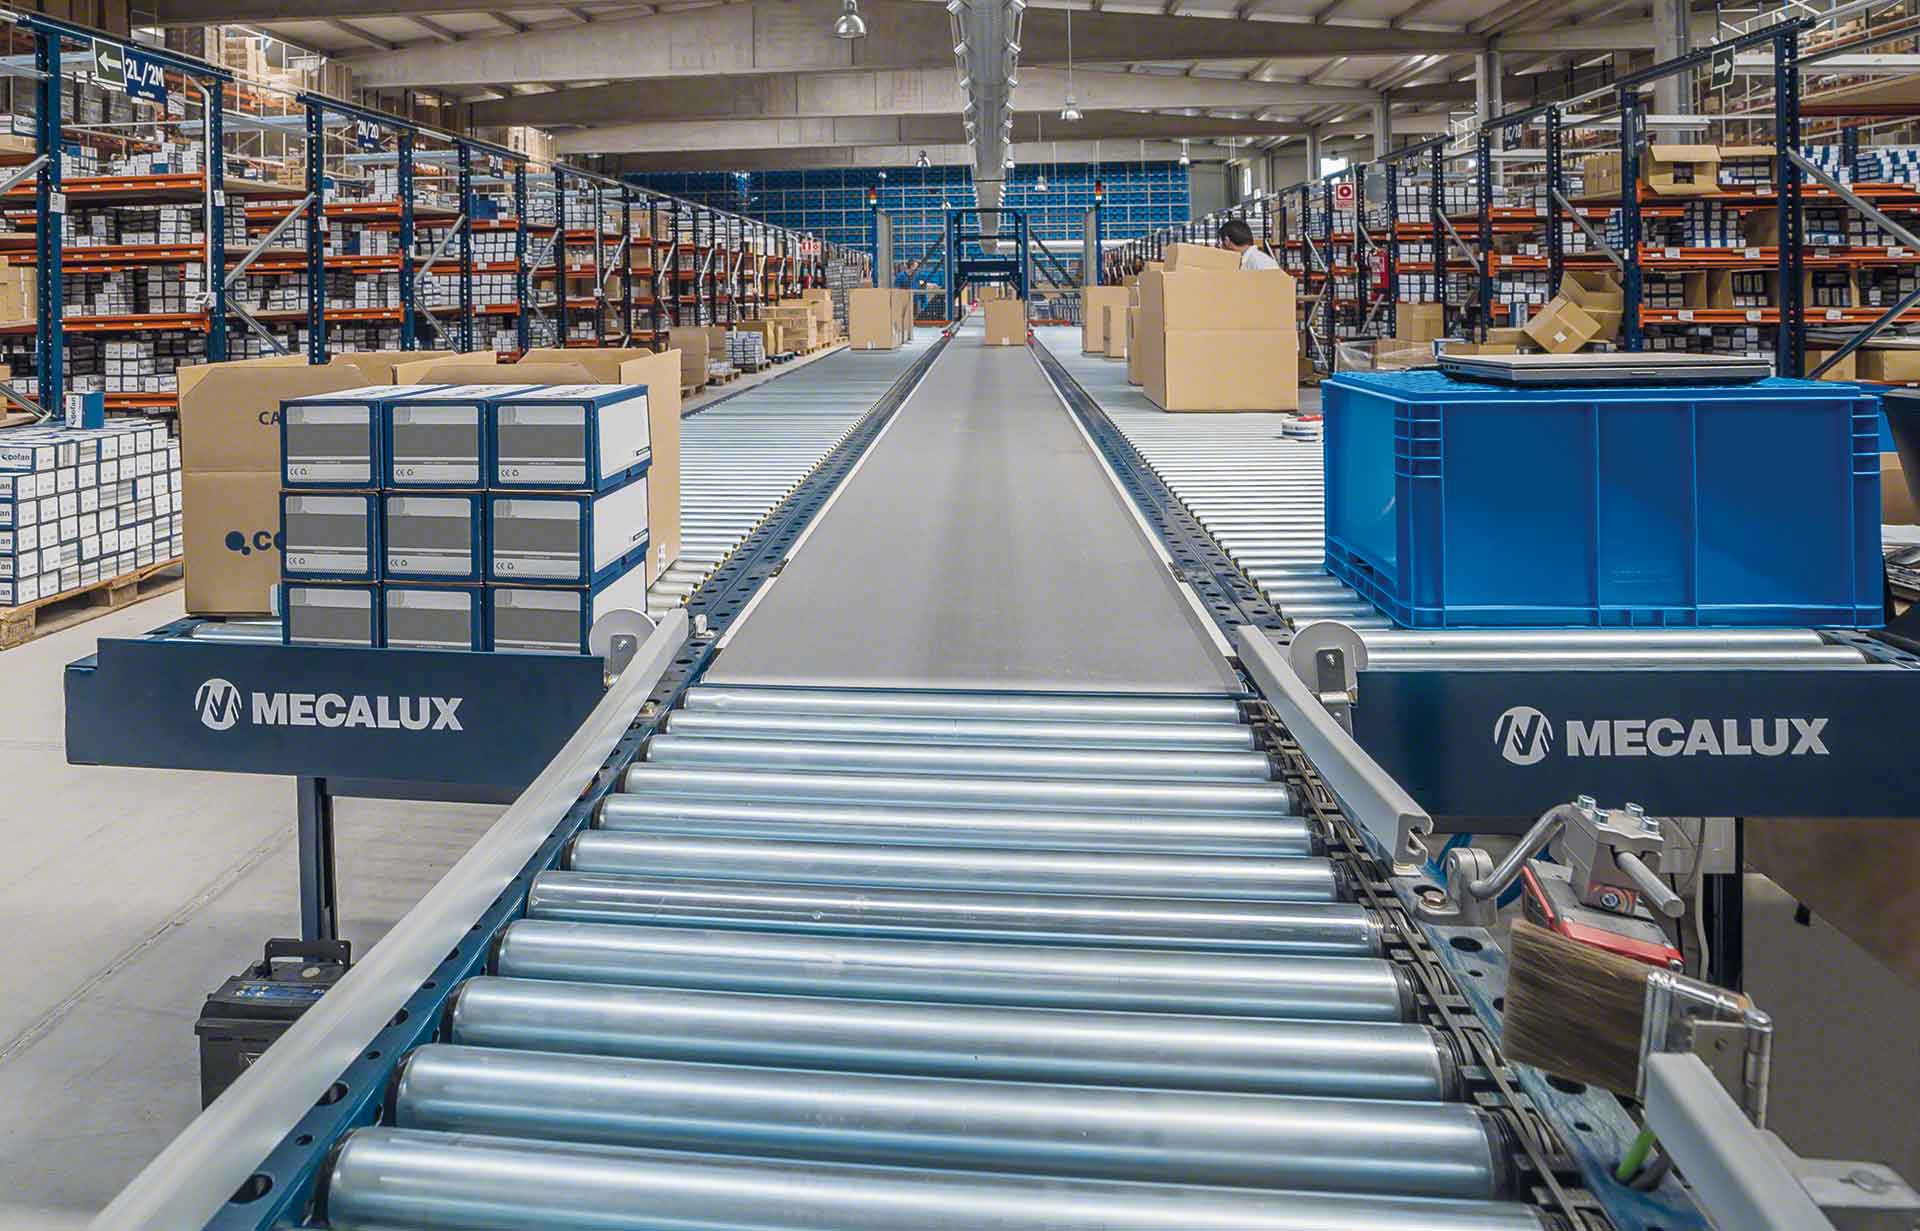 Warehouse Operations: What processes can be automated?